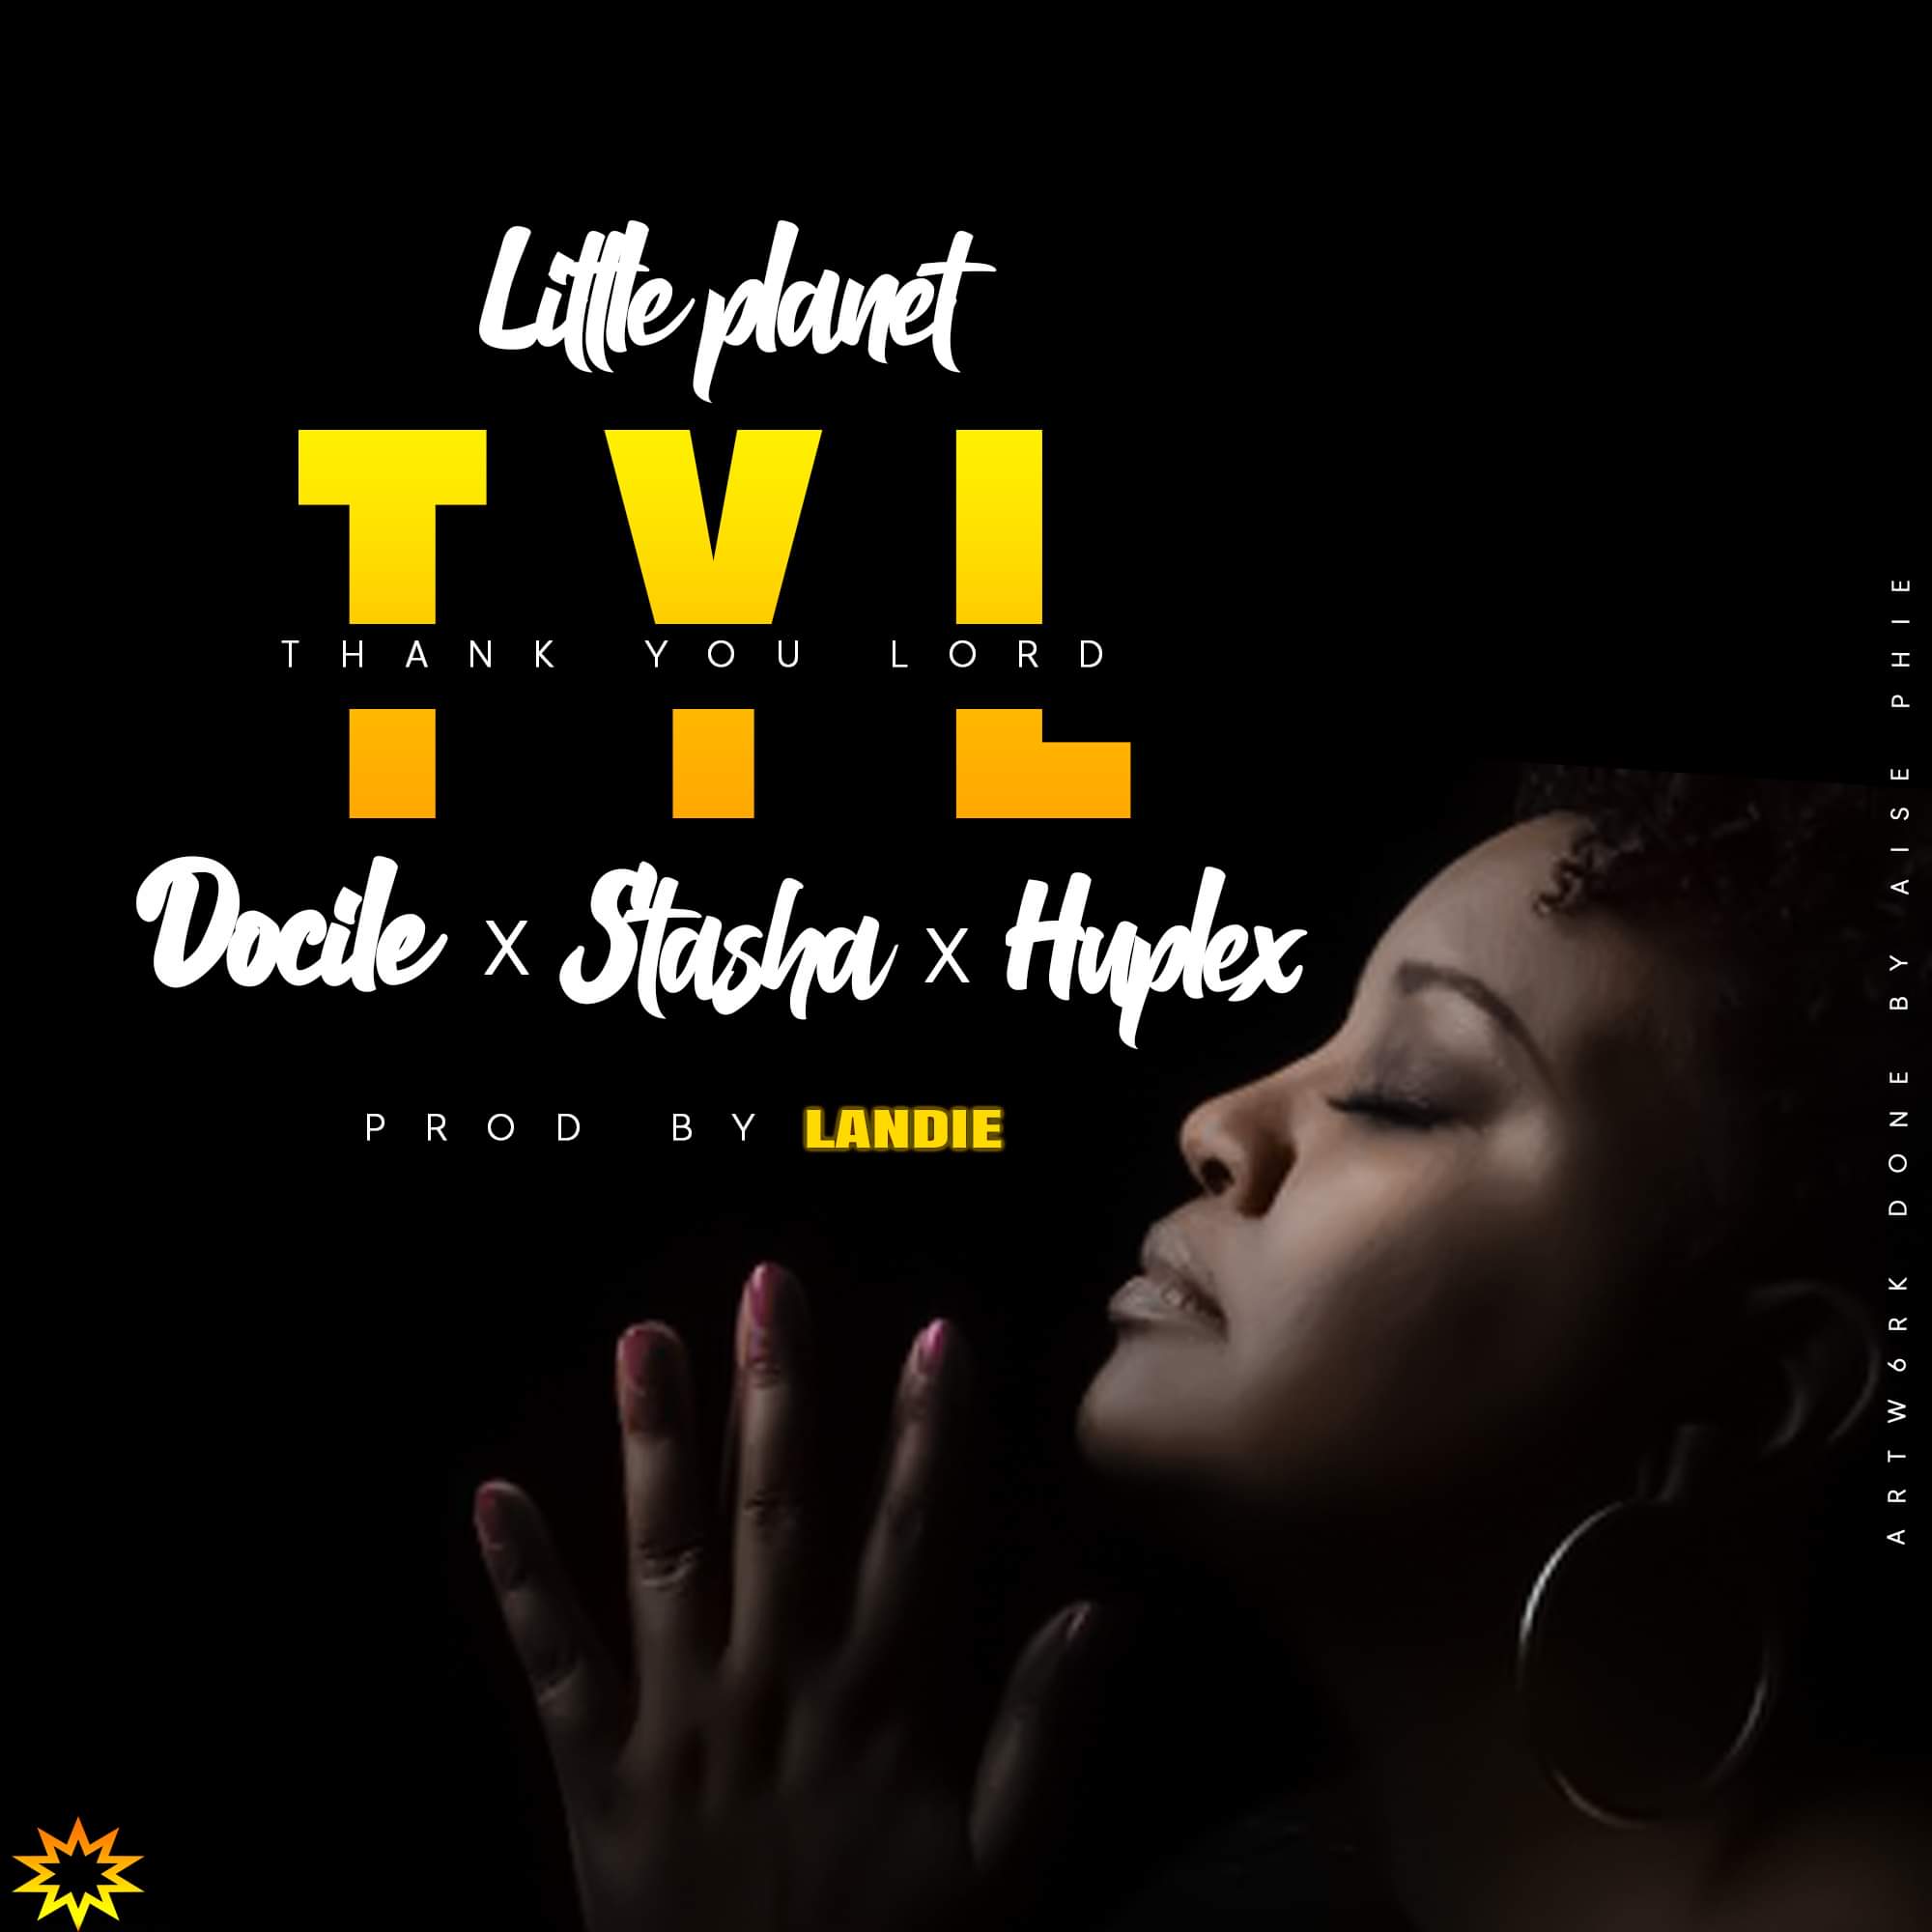 Little Planet – Thank You Lord ft Docile, Stasha, Huplex)